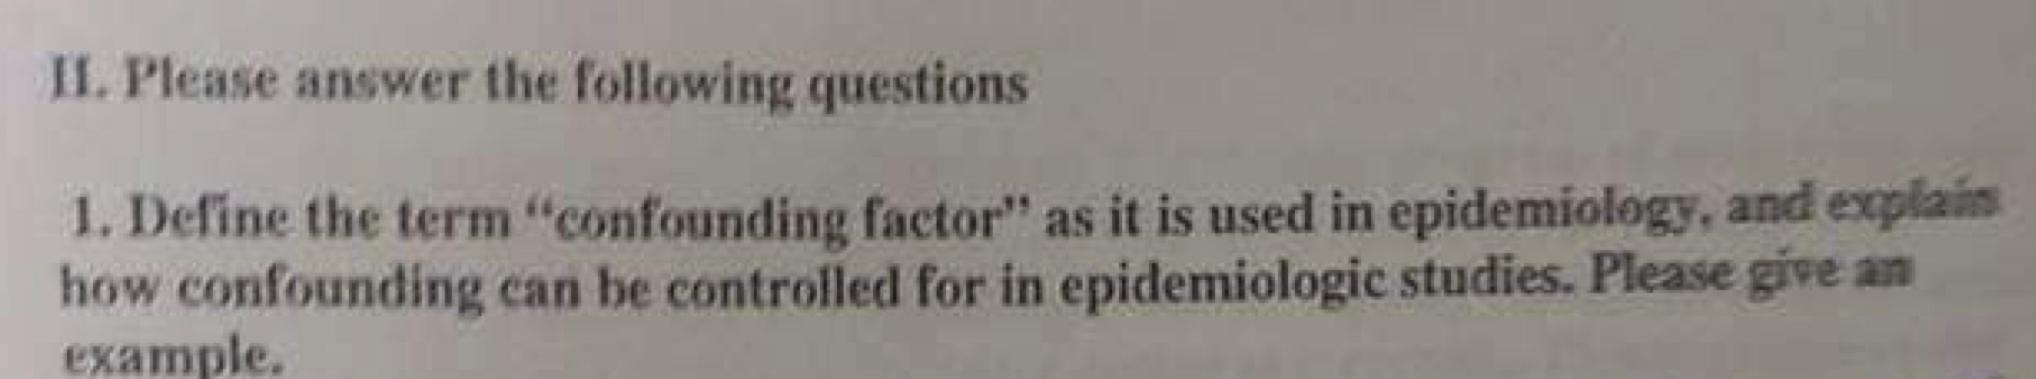 II. Please answer the following questions
1. Define the term confounding factor as it is used in epidemiology, and explais